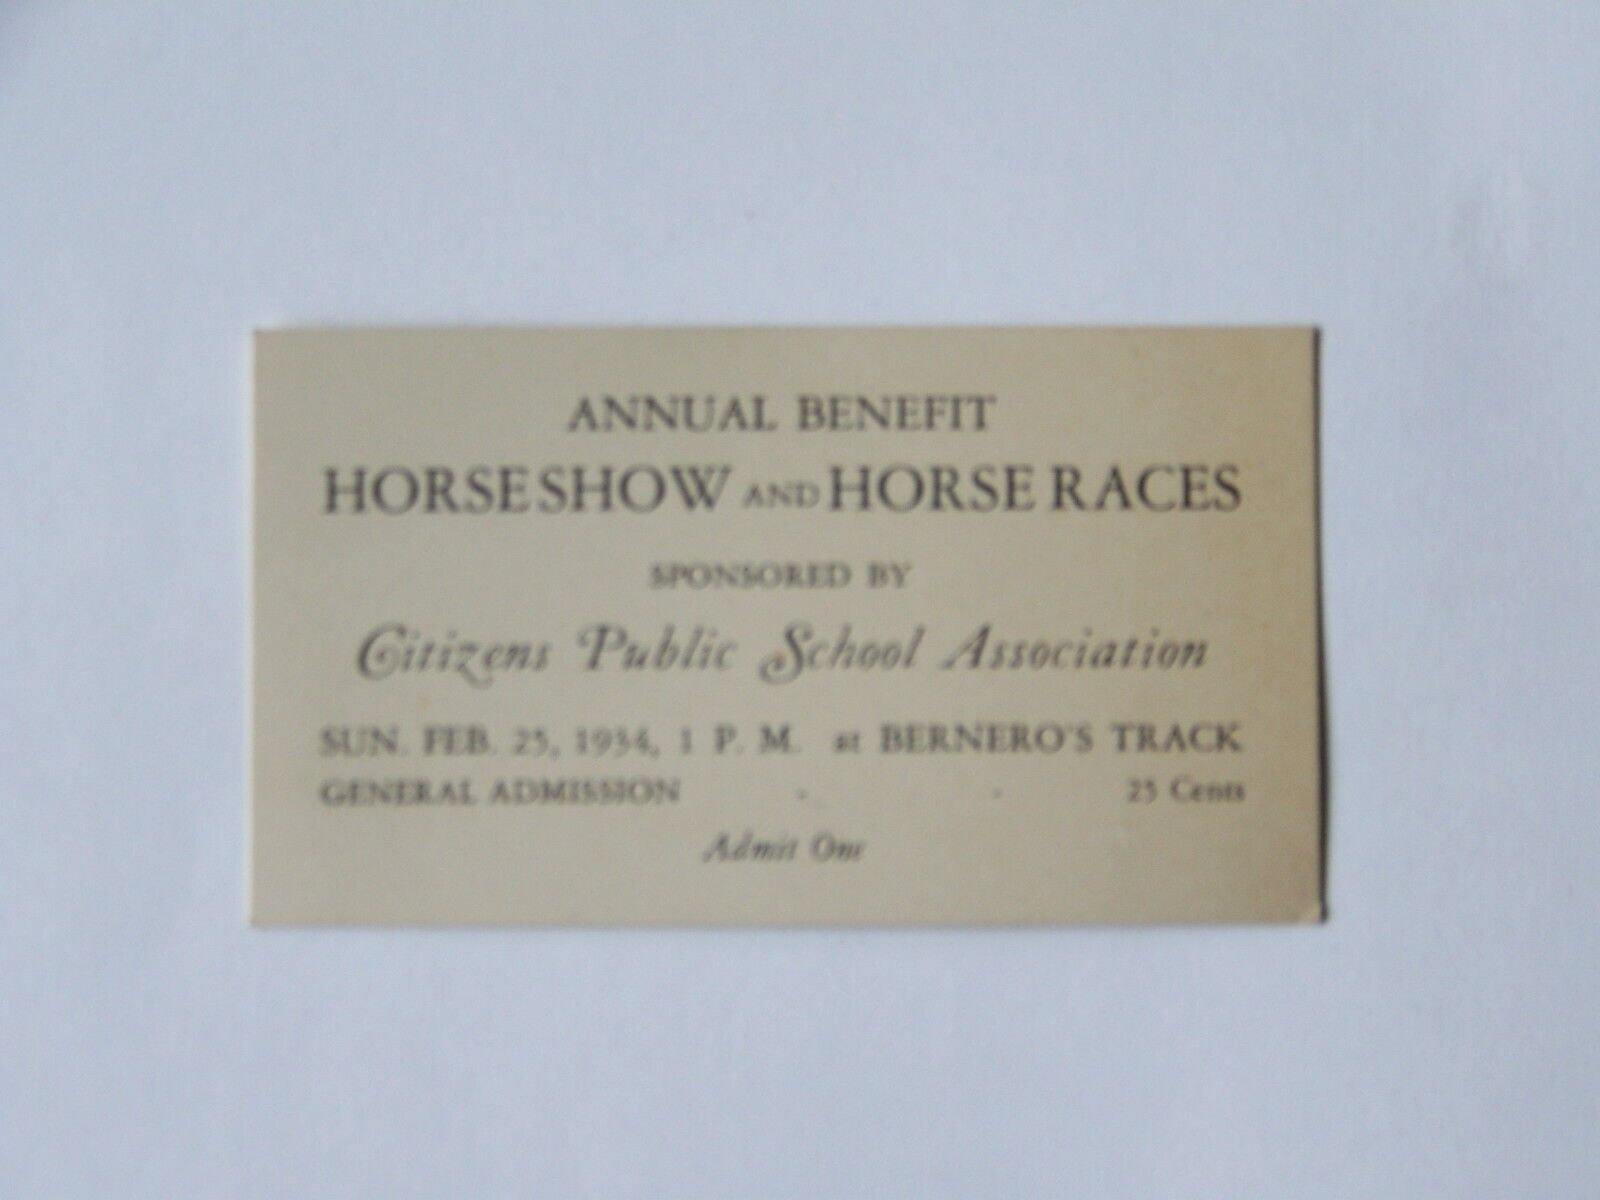 Vineland New Jersey NJ Bernero\'s Track Horse Show and Races 1934 Ticket